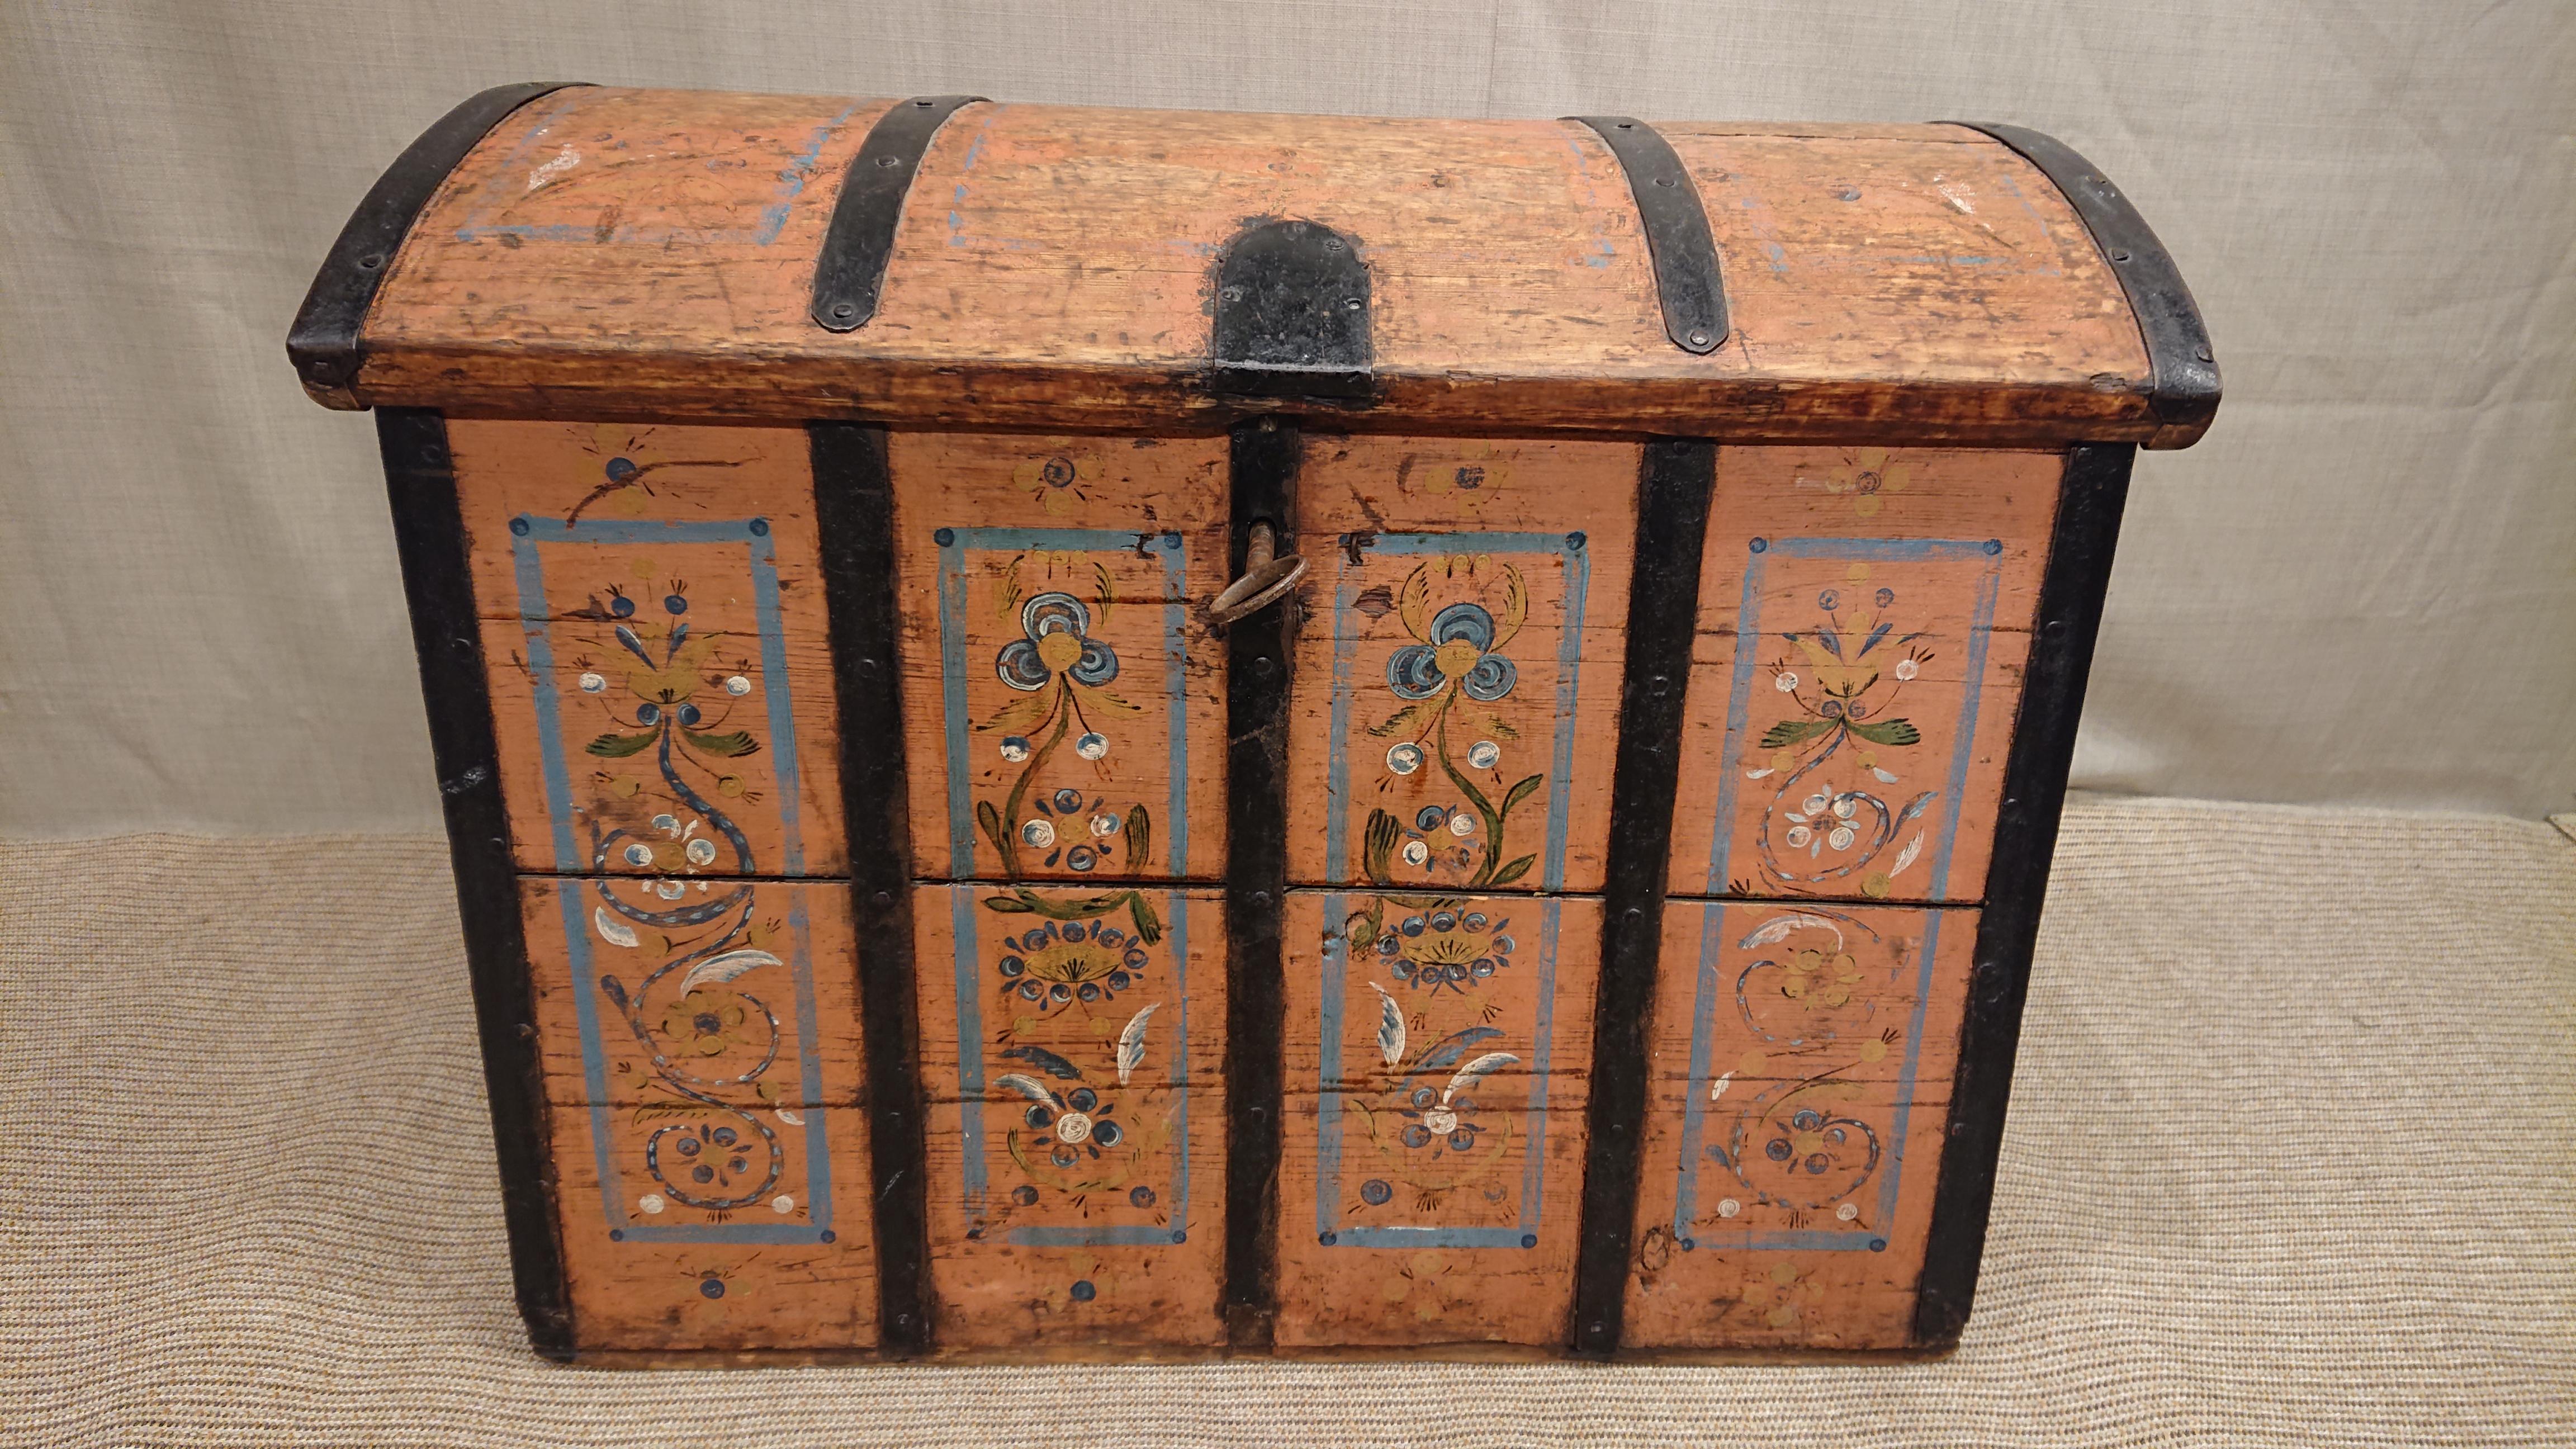 Antique Swedish chest / trunk dated 1833 from Ranea Norrbotten, Northern Sweden.
Beautiful original paint with flowers outside the Chest .
Interior with original hand painted inscription to the lid.
Dated AGAD 1833 inside. 
This is probably a